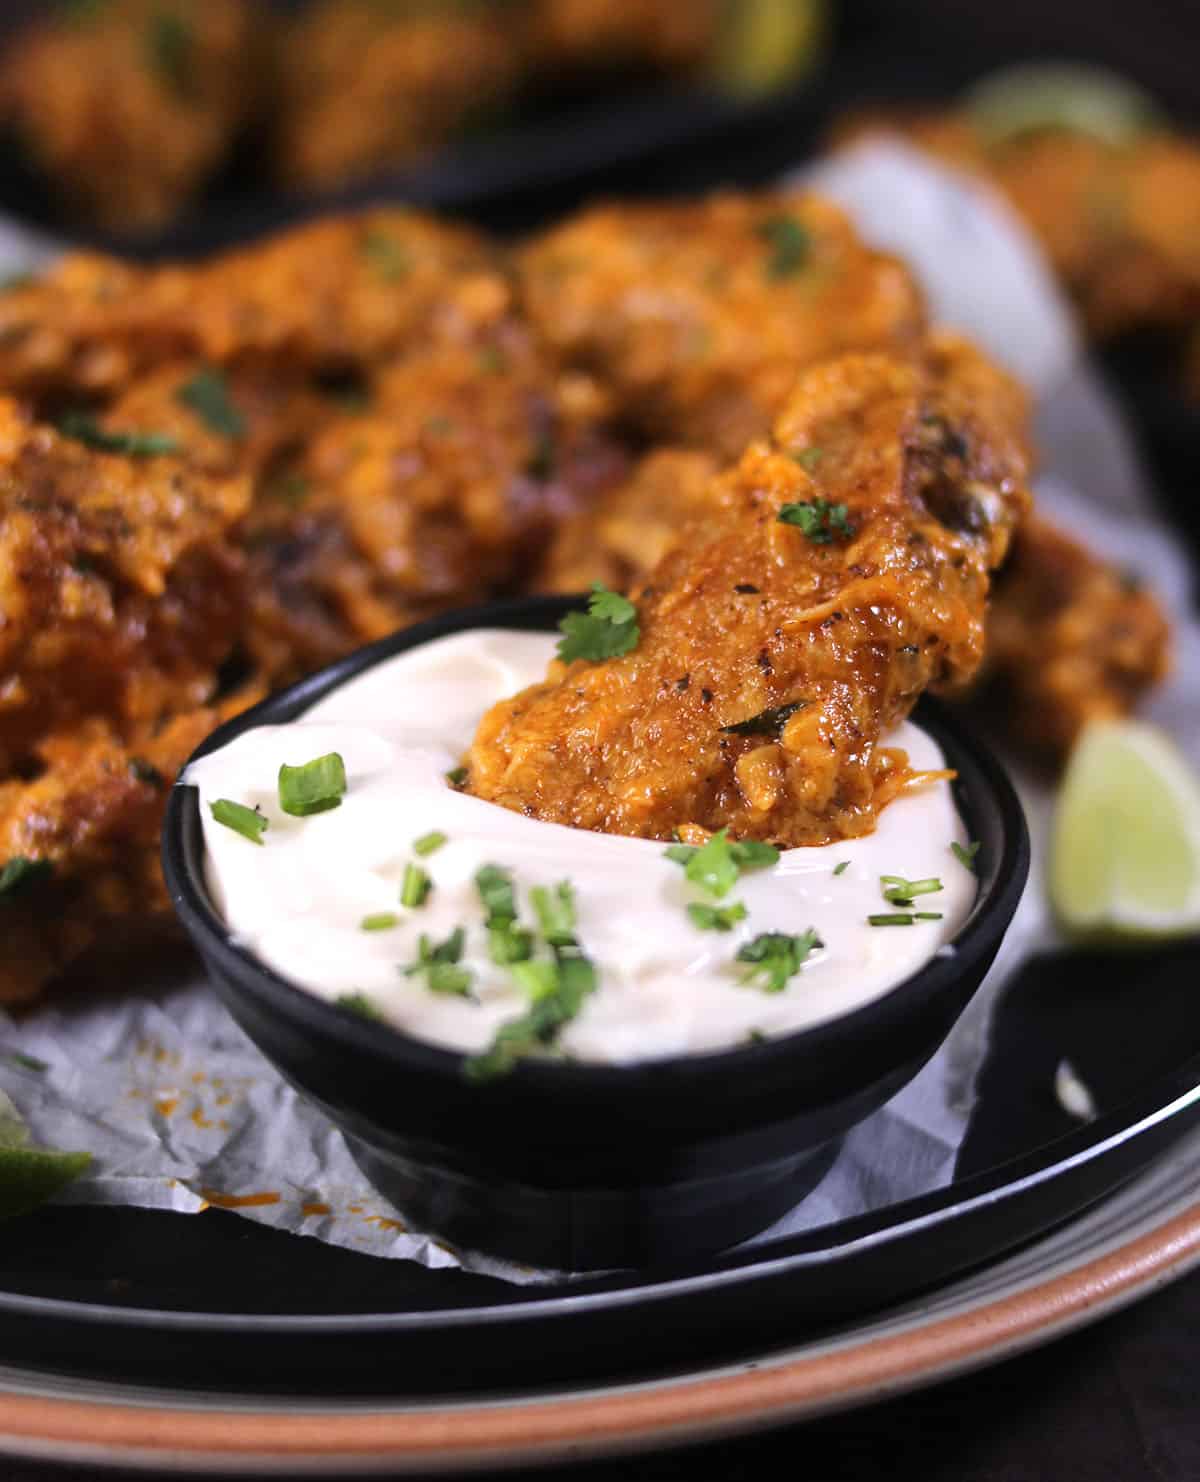 Fried chicken wings tossed in creamy garlic butter sauce. Easy chicken appetizer or finger food.